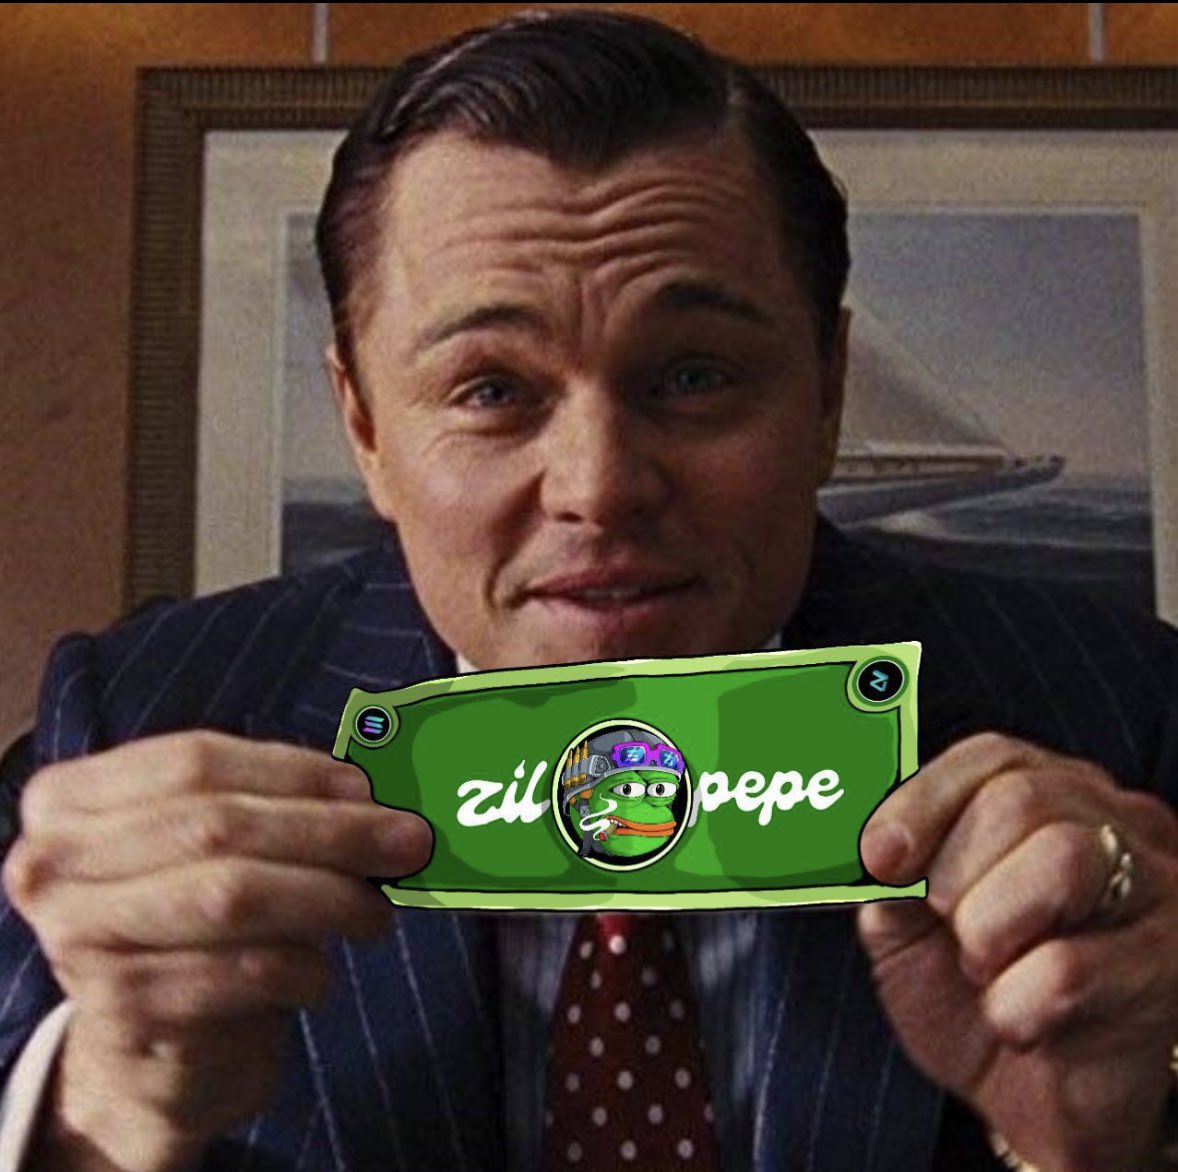 Sup Fam!

Reward: 2x 1B #ZilPepe tokens

Contest👇
1. Like & RT
2. Follow @ZilPepeMemecoin ✅
3. Comment: #ZilPepe and Tag 3 friends
4. Share your favorite meme 
5. Join the TG: t.me/zilpepememecoin

Winners will be DM’d

#Solana #Airdrop #GiveAway #Zilliqa #SolanaAirdrop